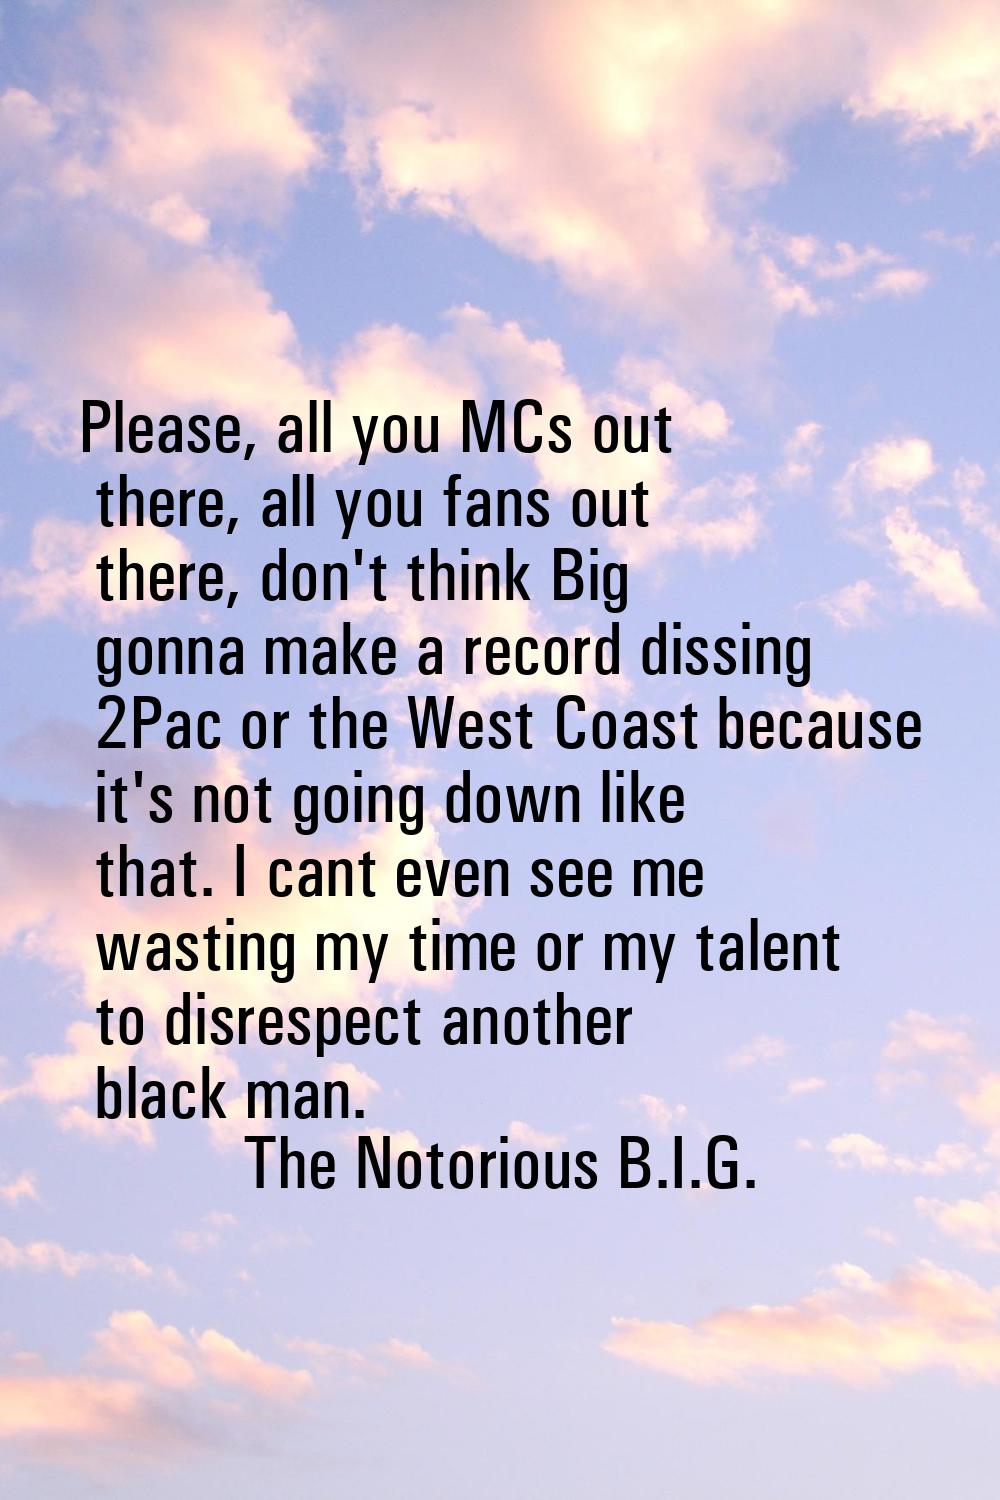 Please, all you MCs out there, all you fans out there, don't think Big gonna make a record dissing 